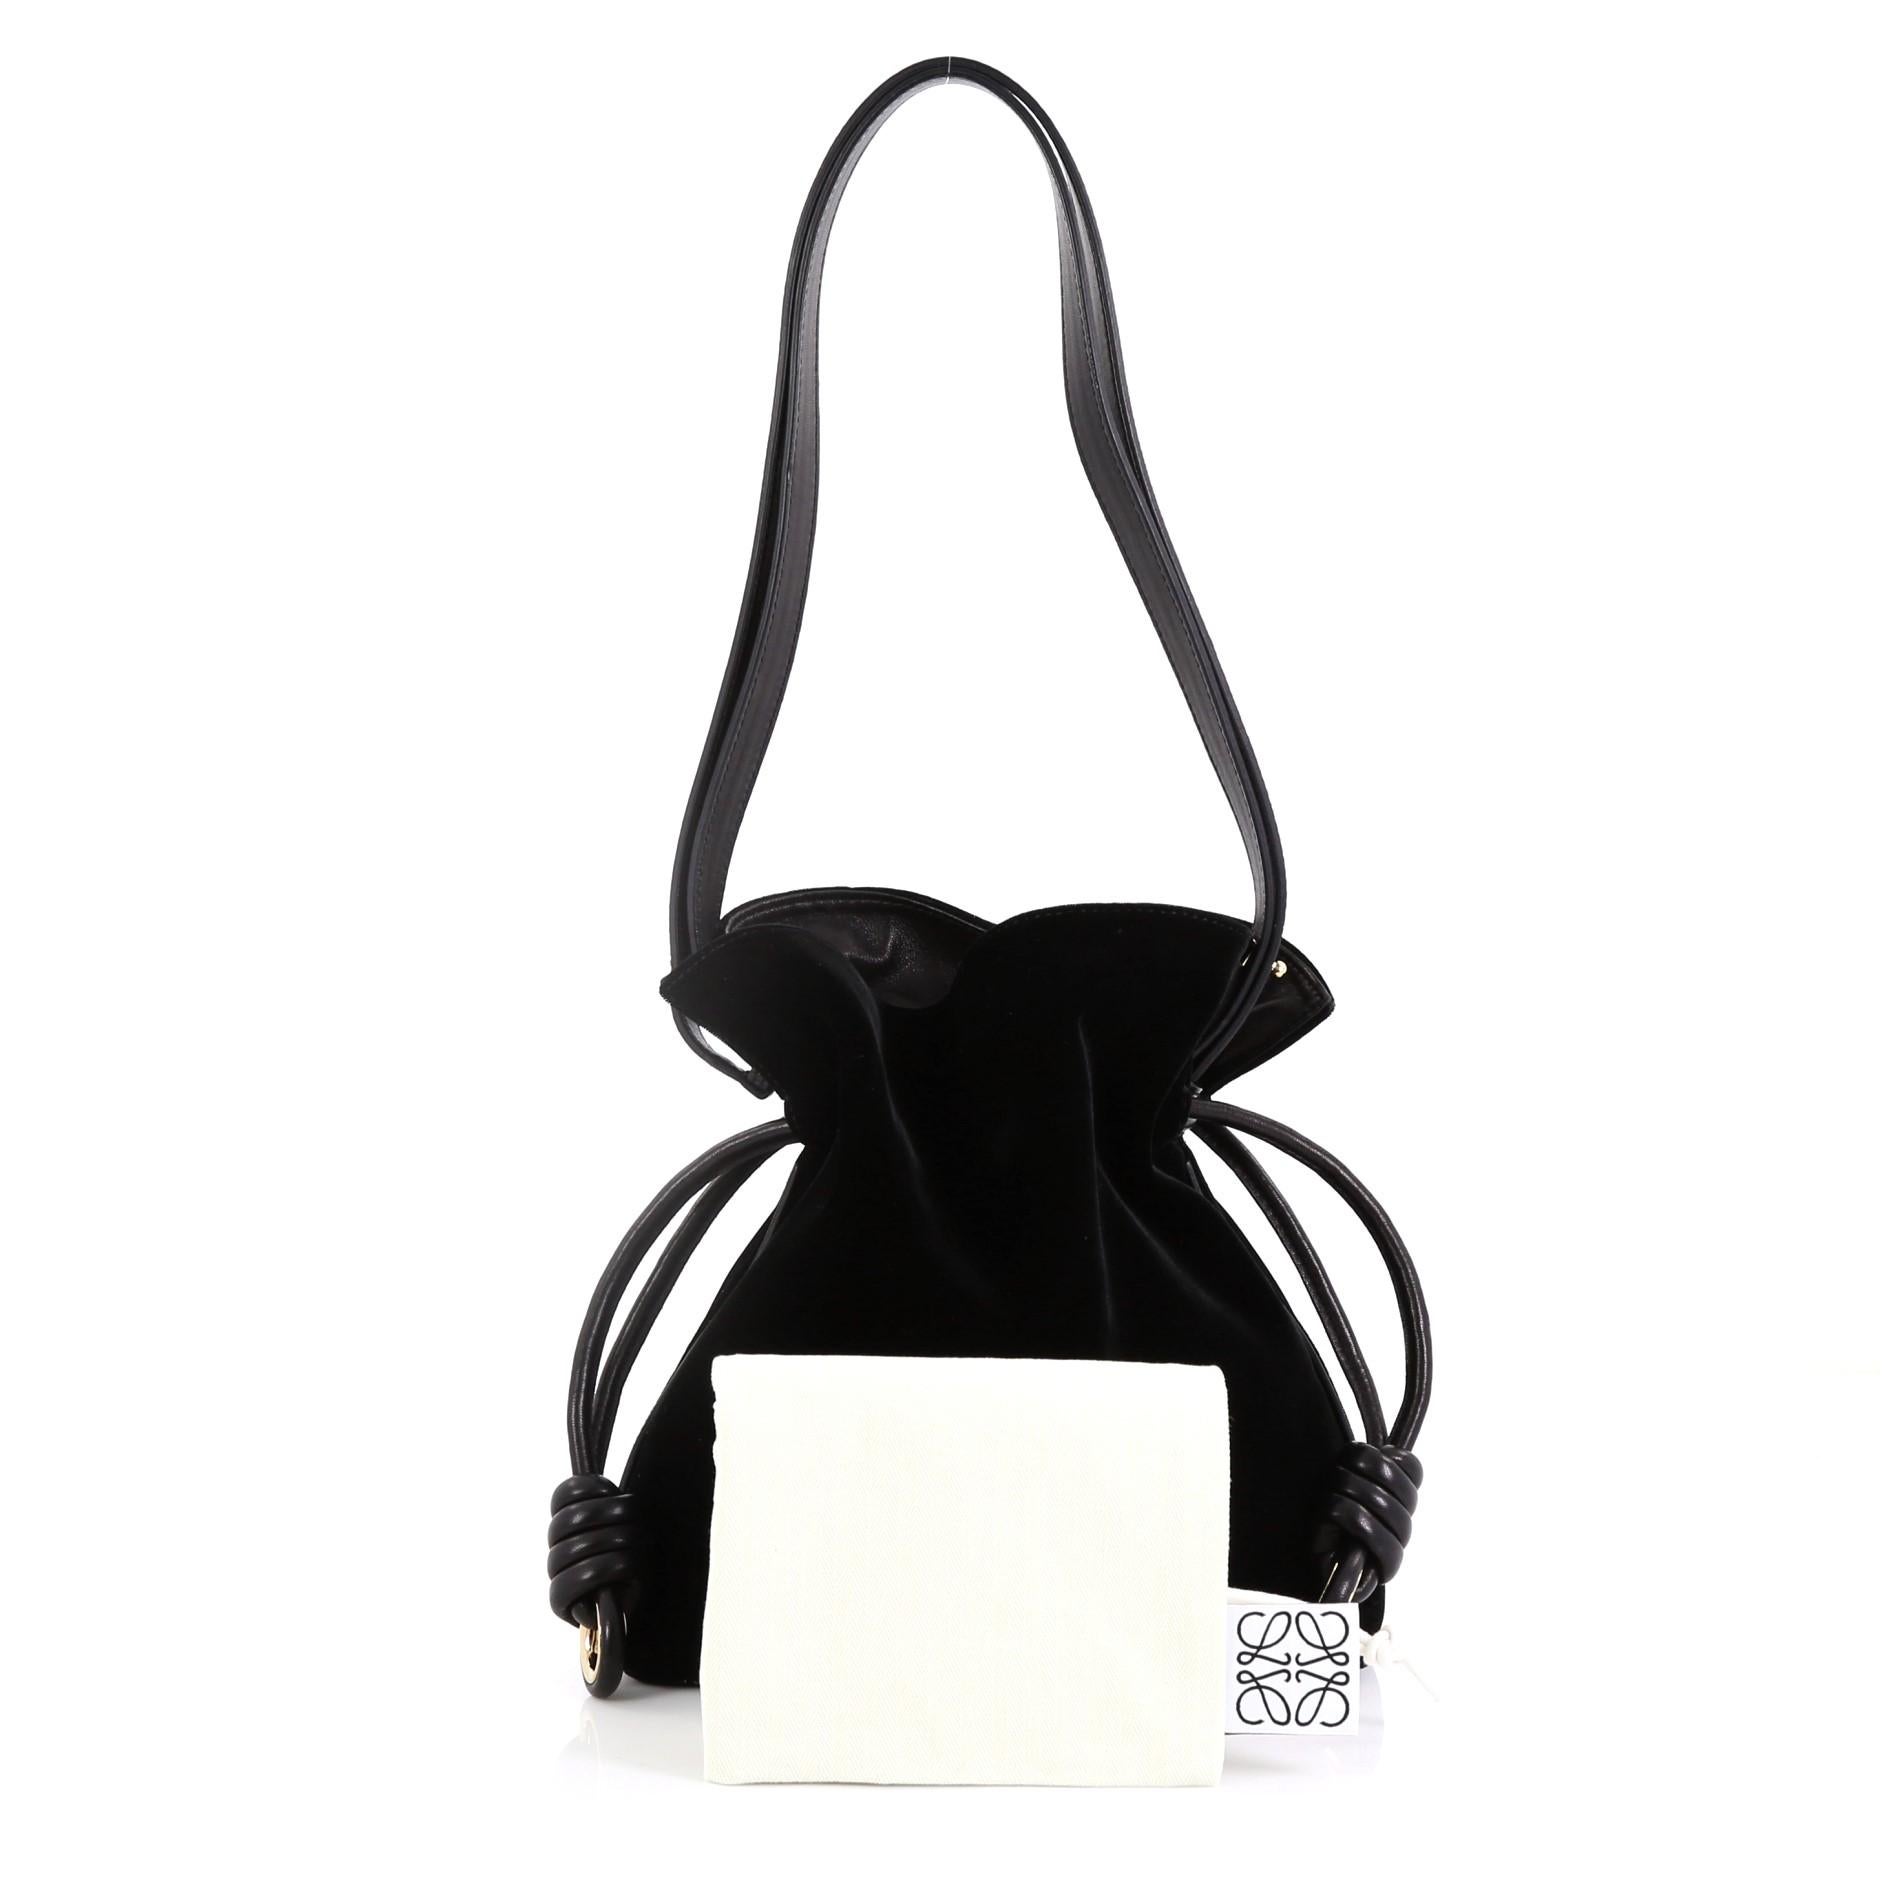 This Loewe Flamenco Knot Bag Velvet Small, crafted in black velvet and leather, features a leather shoulder strap, drawstring top with oversized knots, and gold-tone hardware. Its drawstring closure opens to a black leather interior with side snap